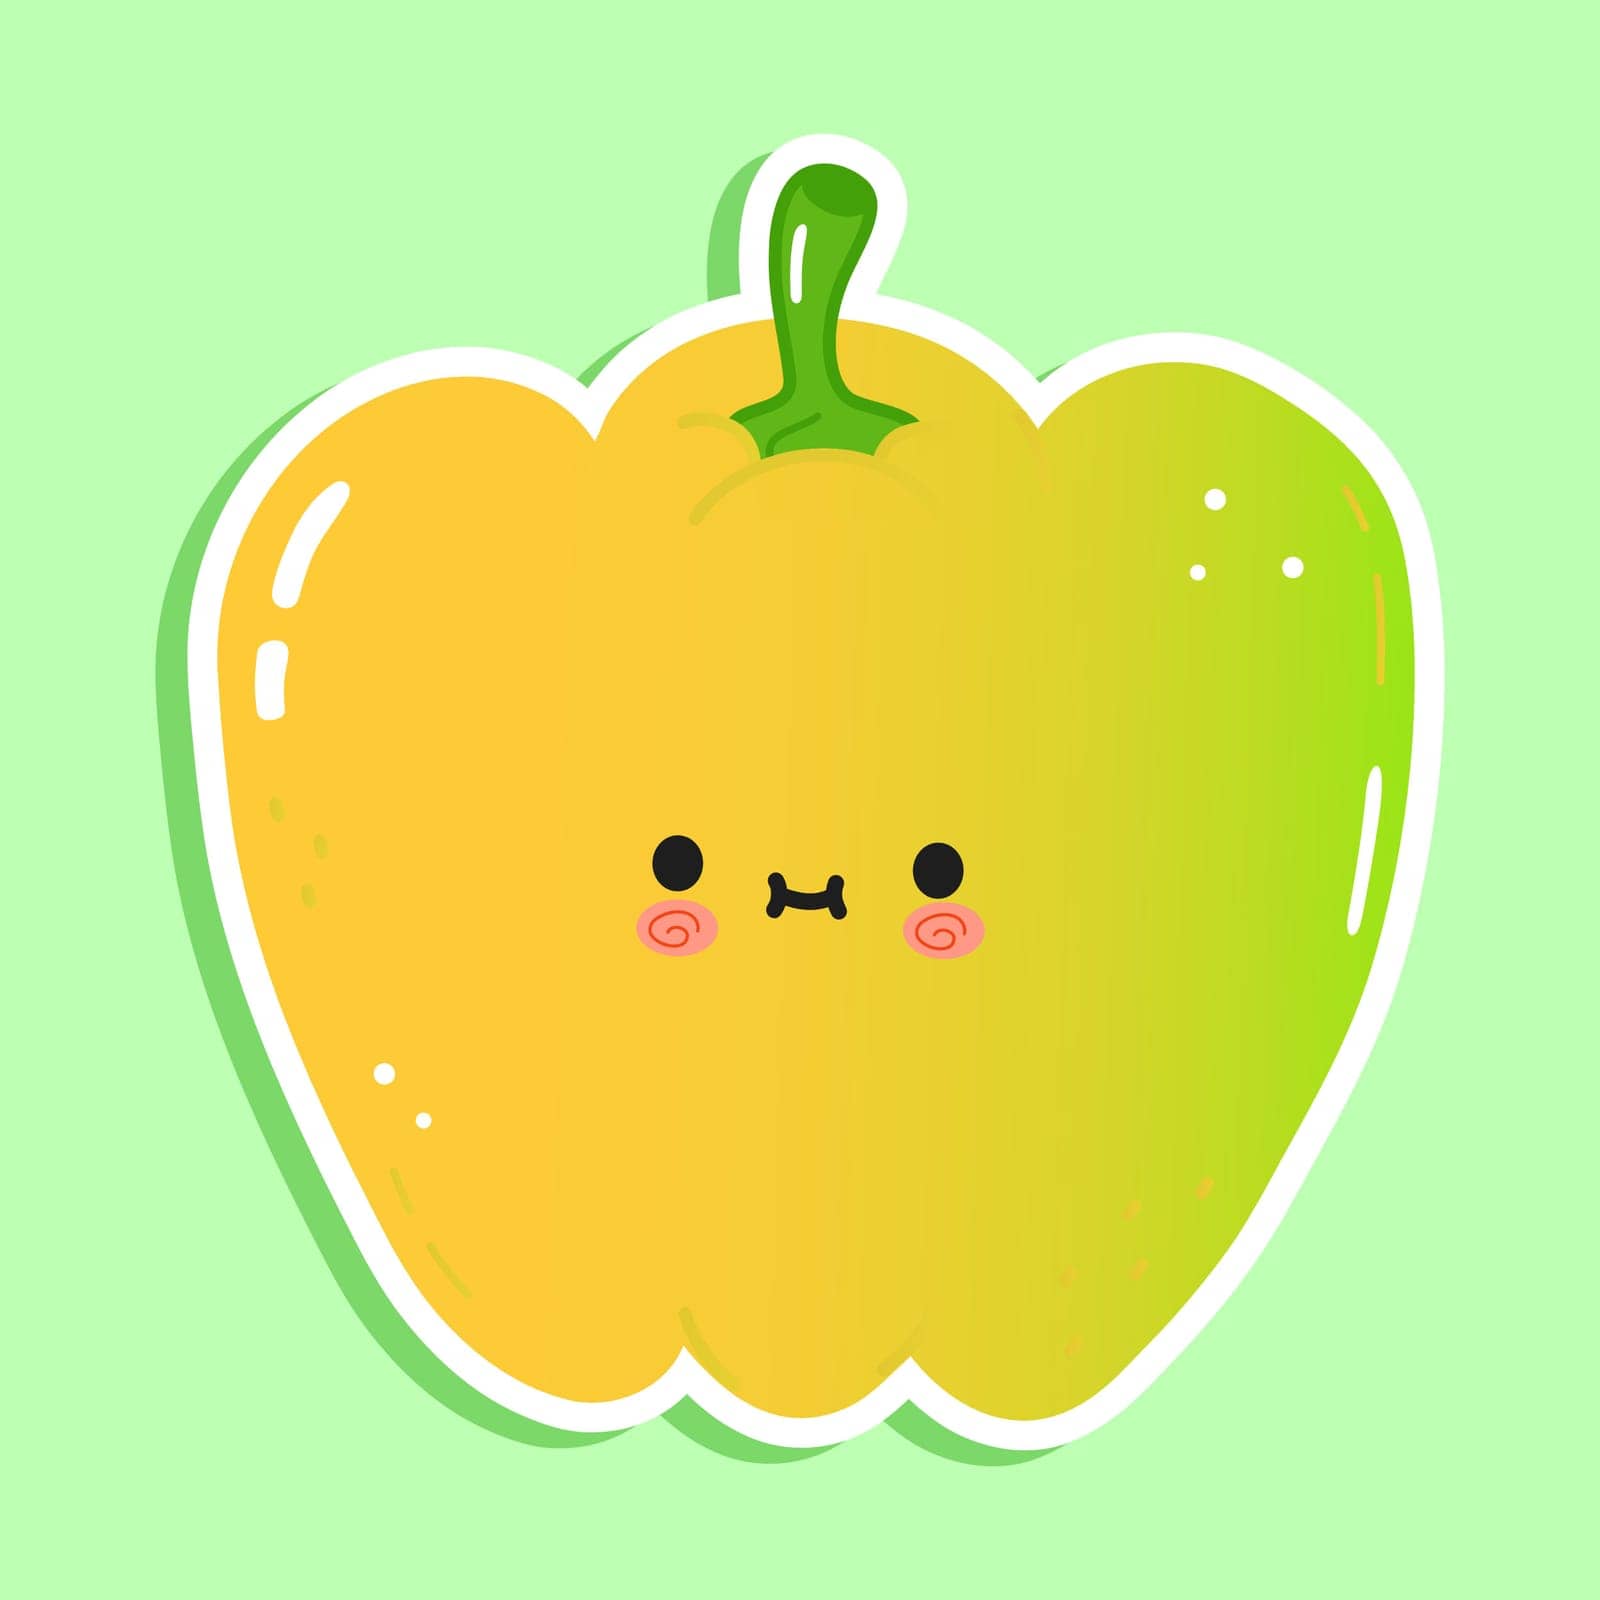 Cute funny colored bell pepper sticker character. Vector hand drawn cartoon kawaii character illustration icon. Isolated on green background. Happy colored bell pepper character concept